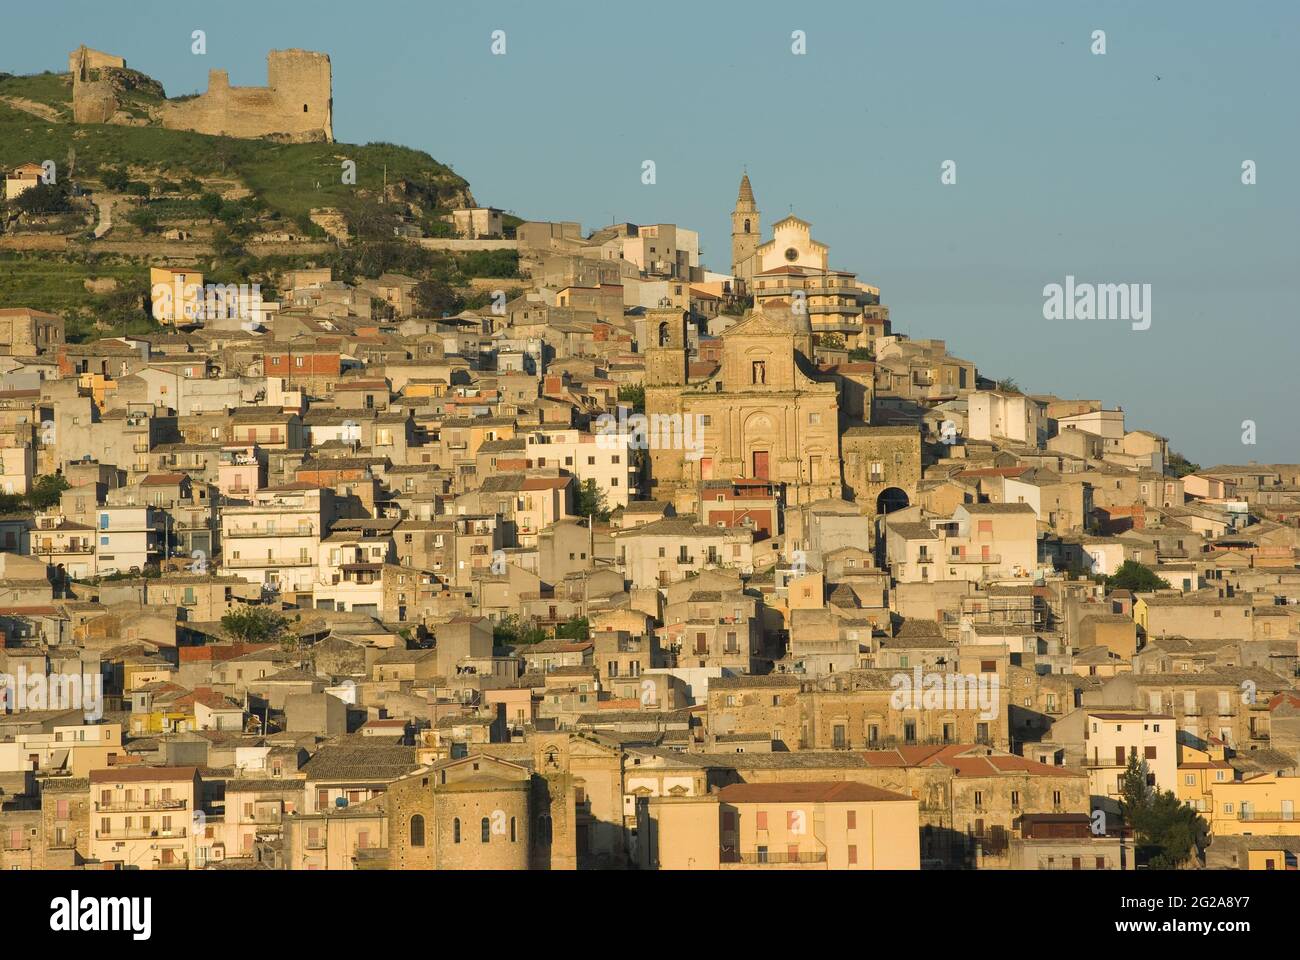 glimpse of the houses and the churches on the hill on which stands the city of Agira in Italy Stock Photo